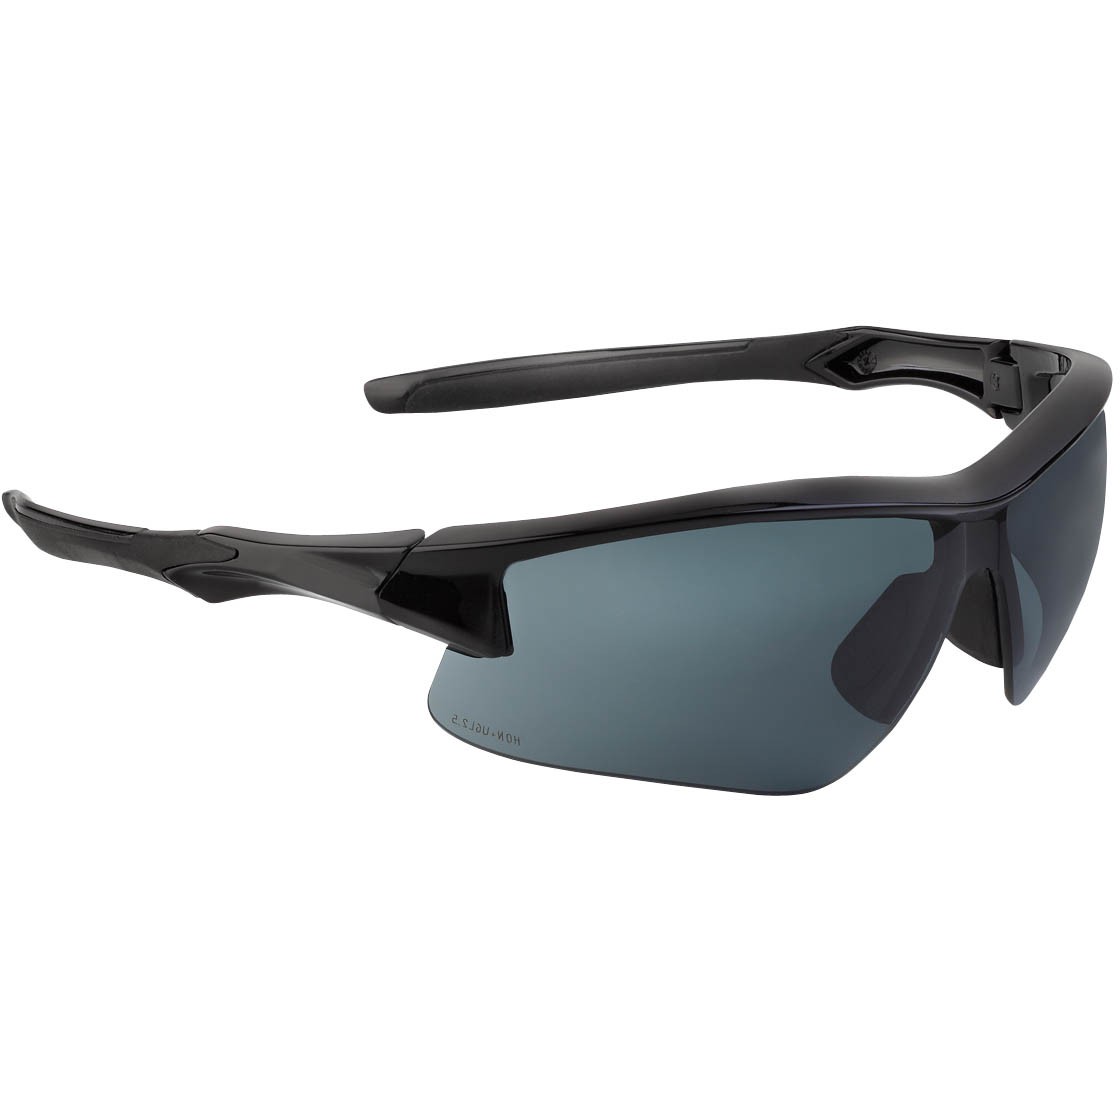 Howard Leight by Honeywell Acadia Shooter's Safety Eyewear, Black Frame, Gray Lens with Uvextreme Plus Anti-Fog lens coating - R-02217